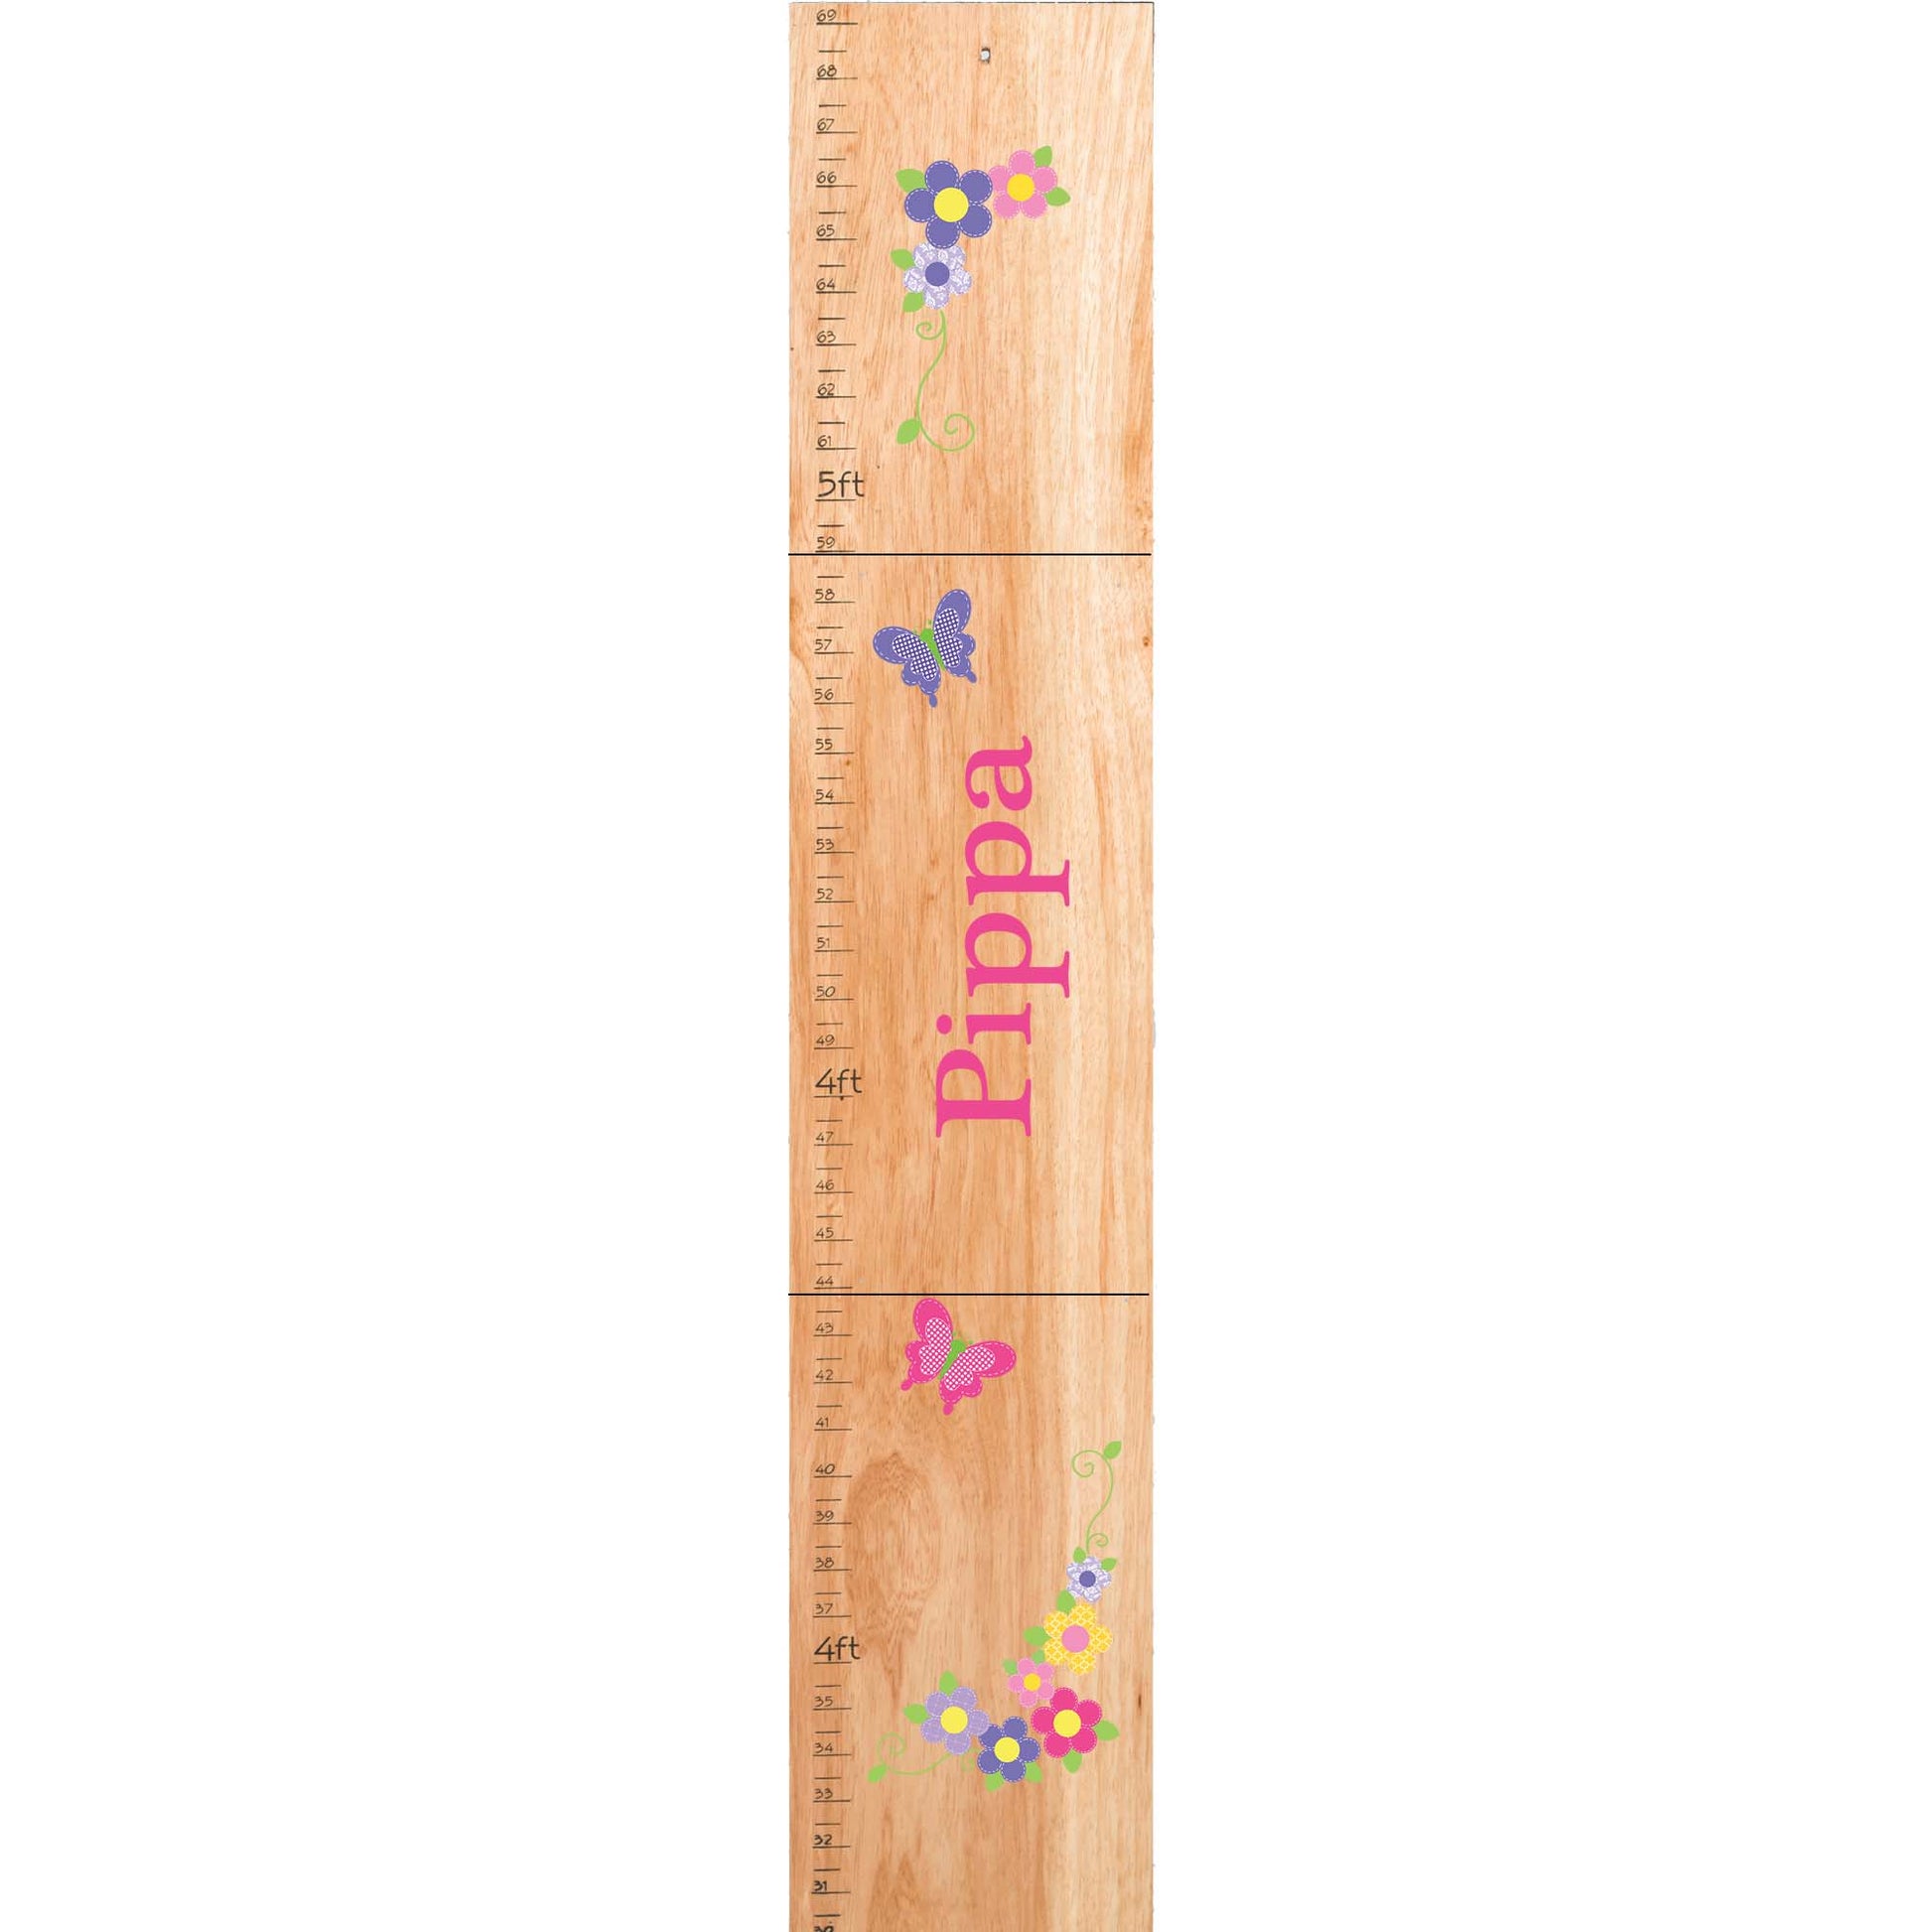 Personalized Natural Growth Chart With Butterfly Garland Pastel Design